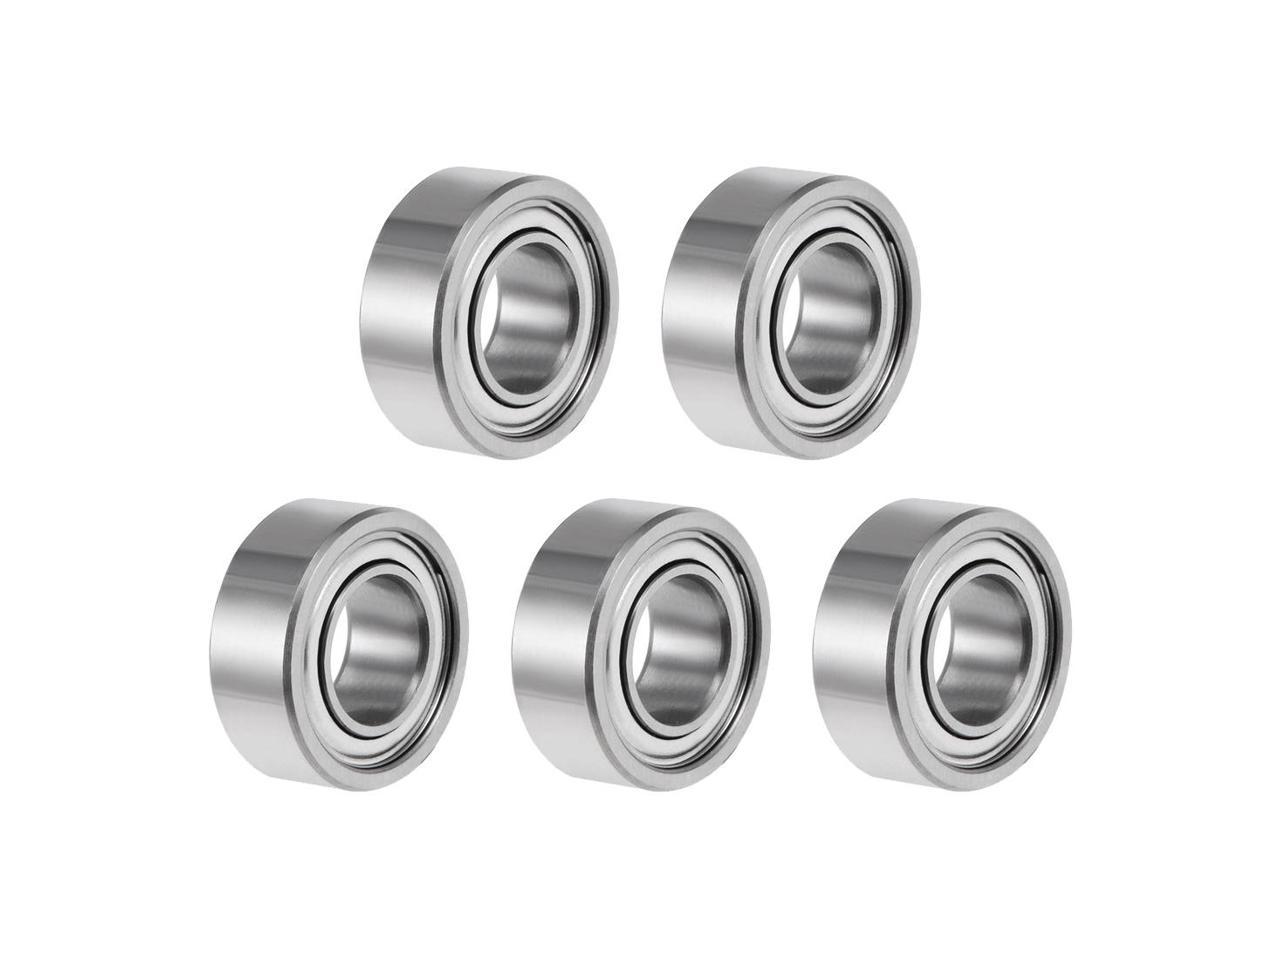 Details about   10PCS R188ZZ 1/4" x 1/2" x 3/16" Inch Deep Groove Ball Bearings Z2 Chrome Steel 